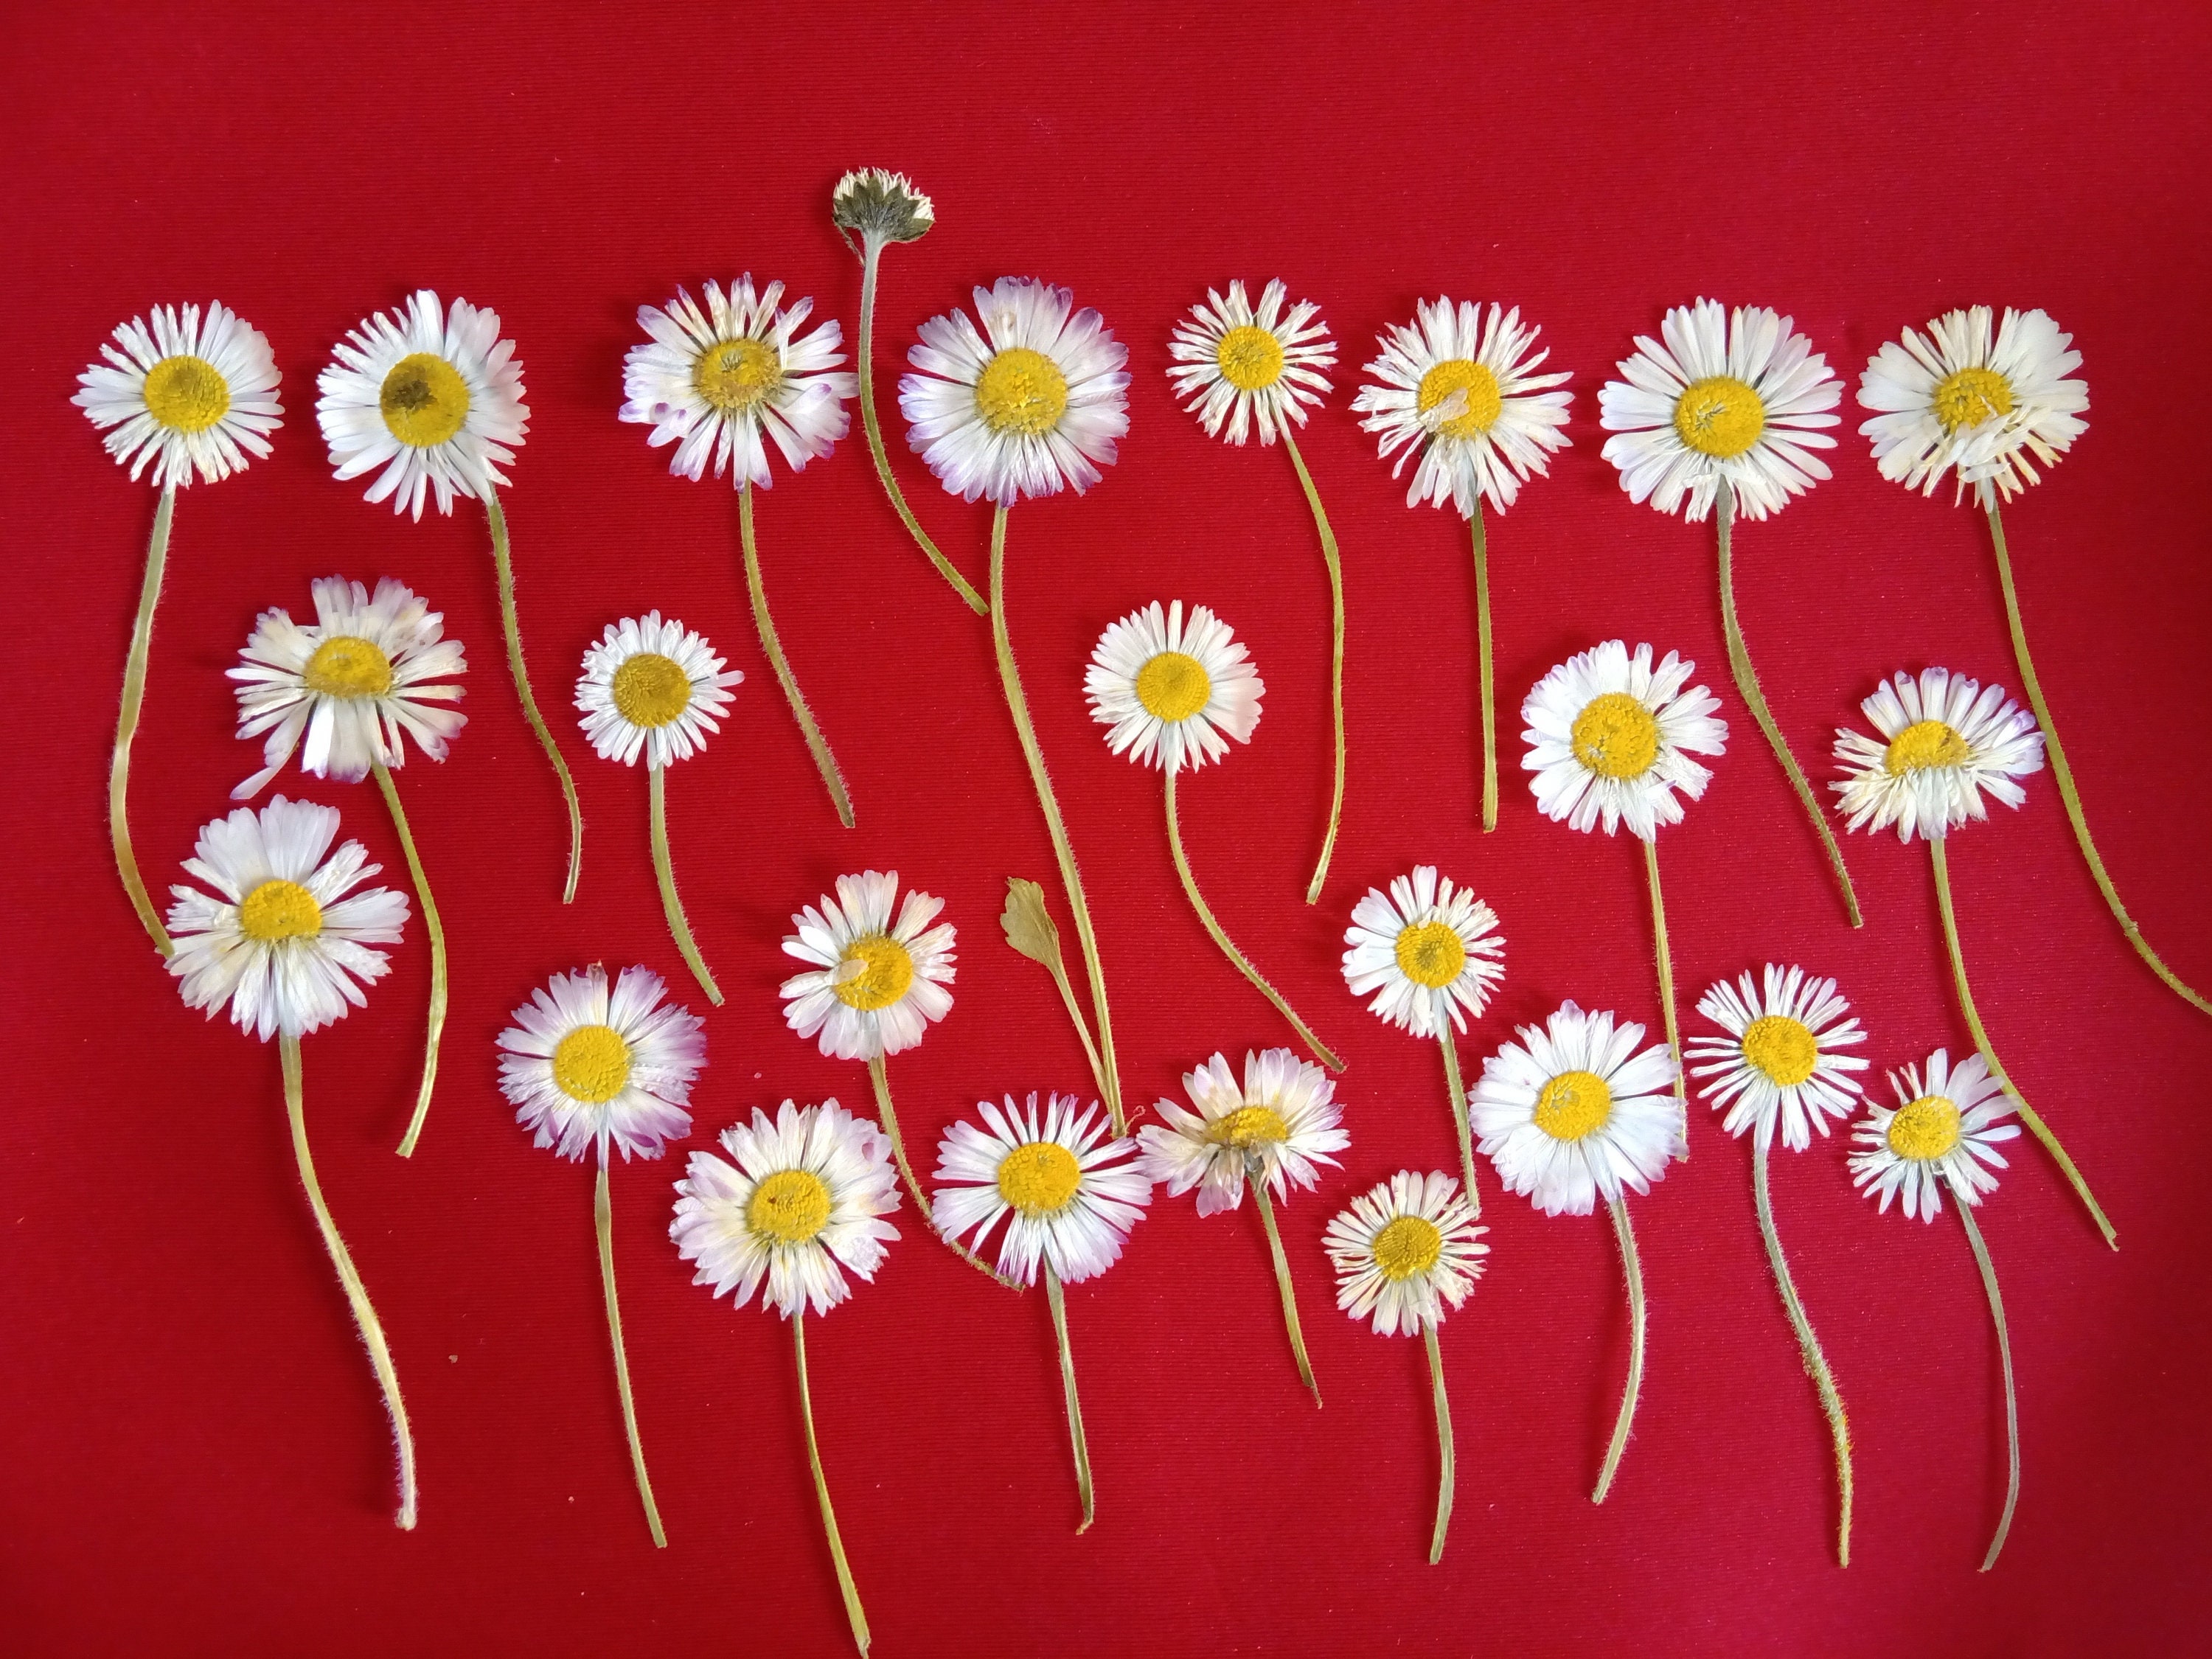 12pcs Pressed Flower Dried Daisy Flowers For DIY Art Crafts Resin Jewelry Making 